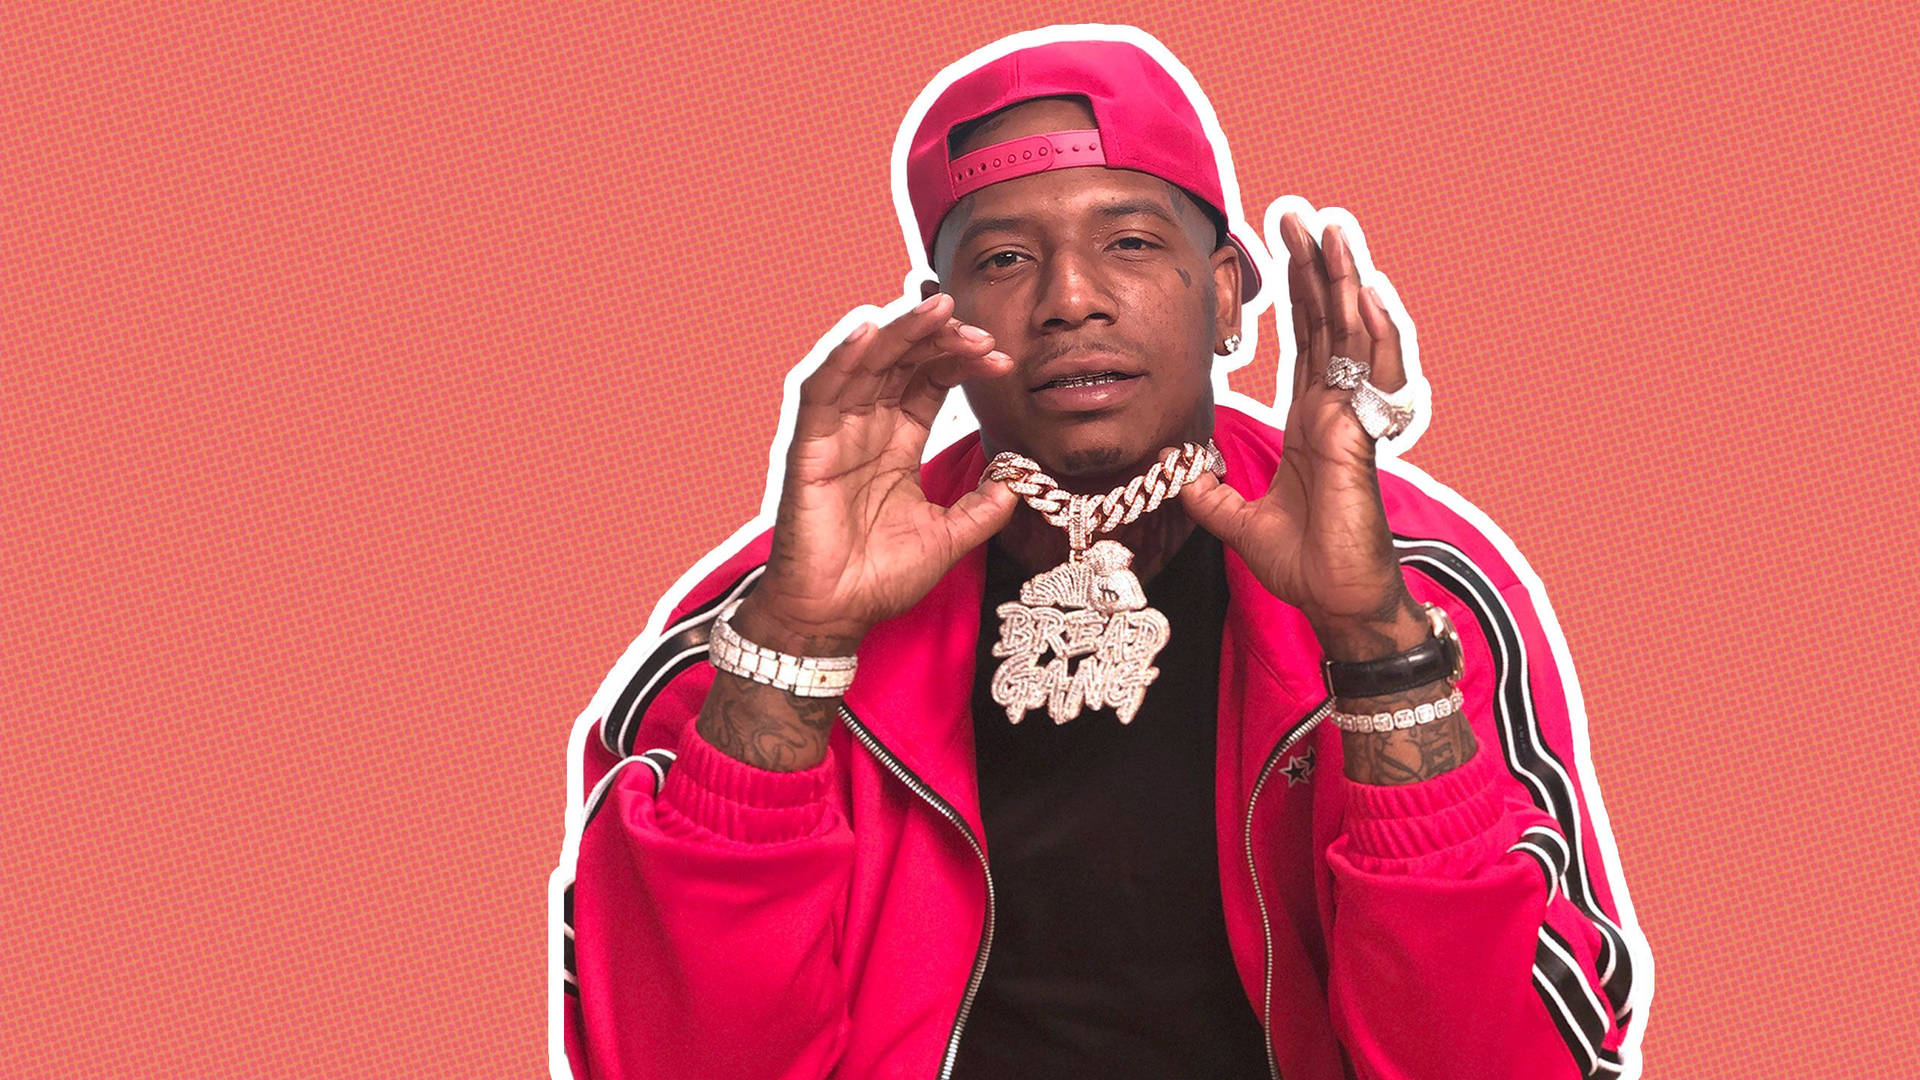 Moneybagg Yo 2560X1440 Wallpaper and Background Image